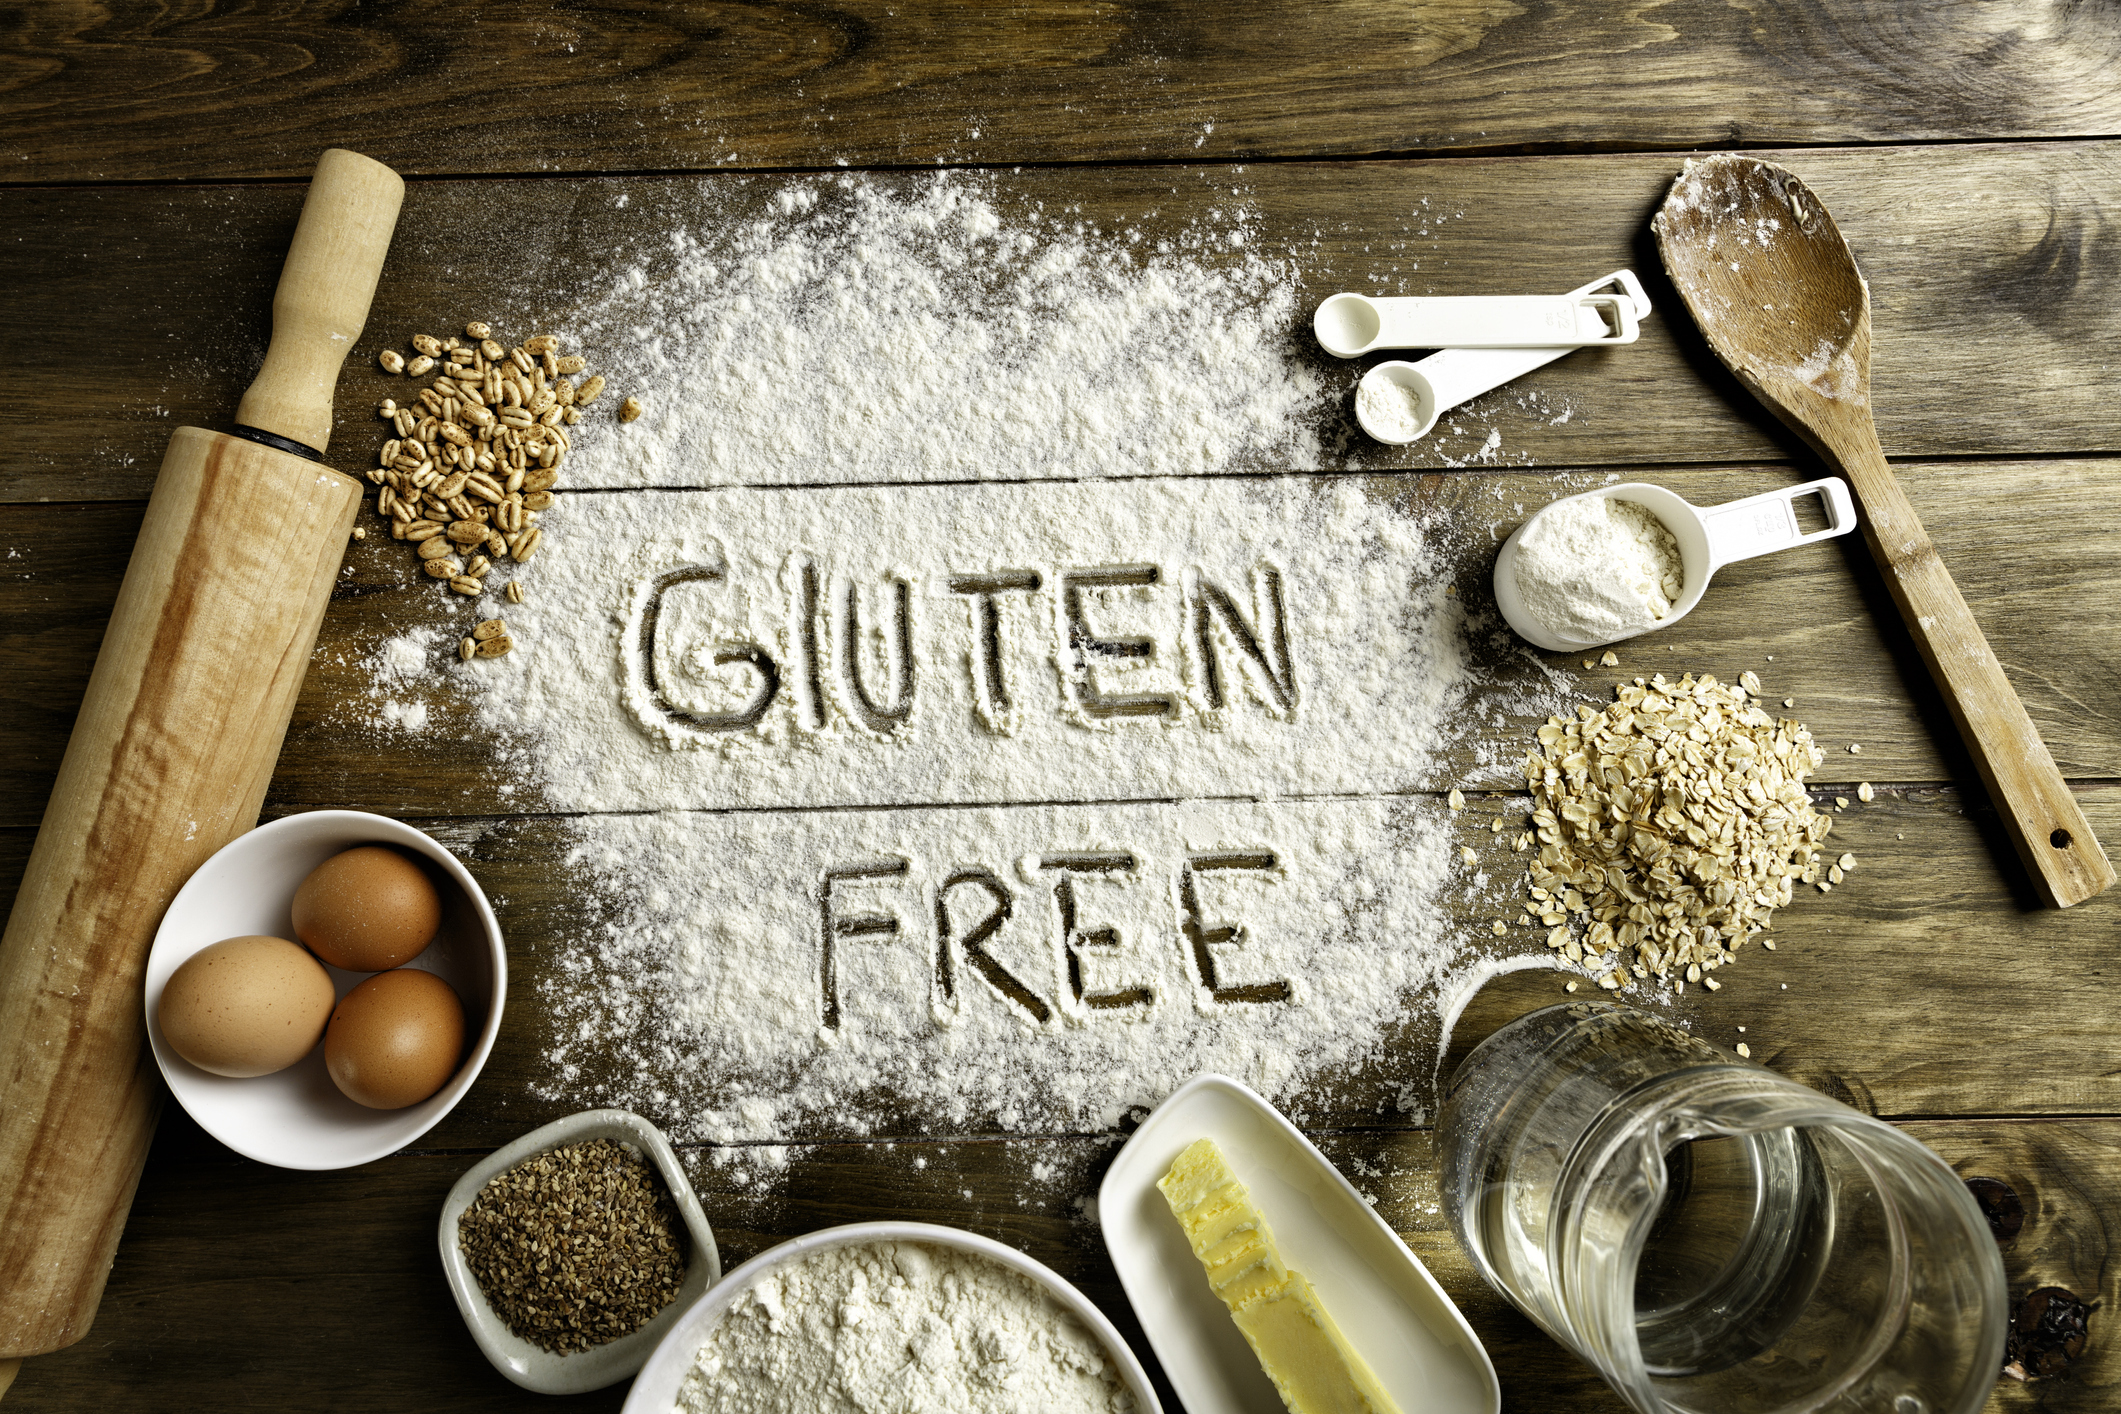 FUNIBER-gluten-free-bread-ingredients-and-utensils-on-wood-frame-background